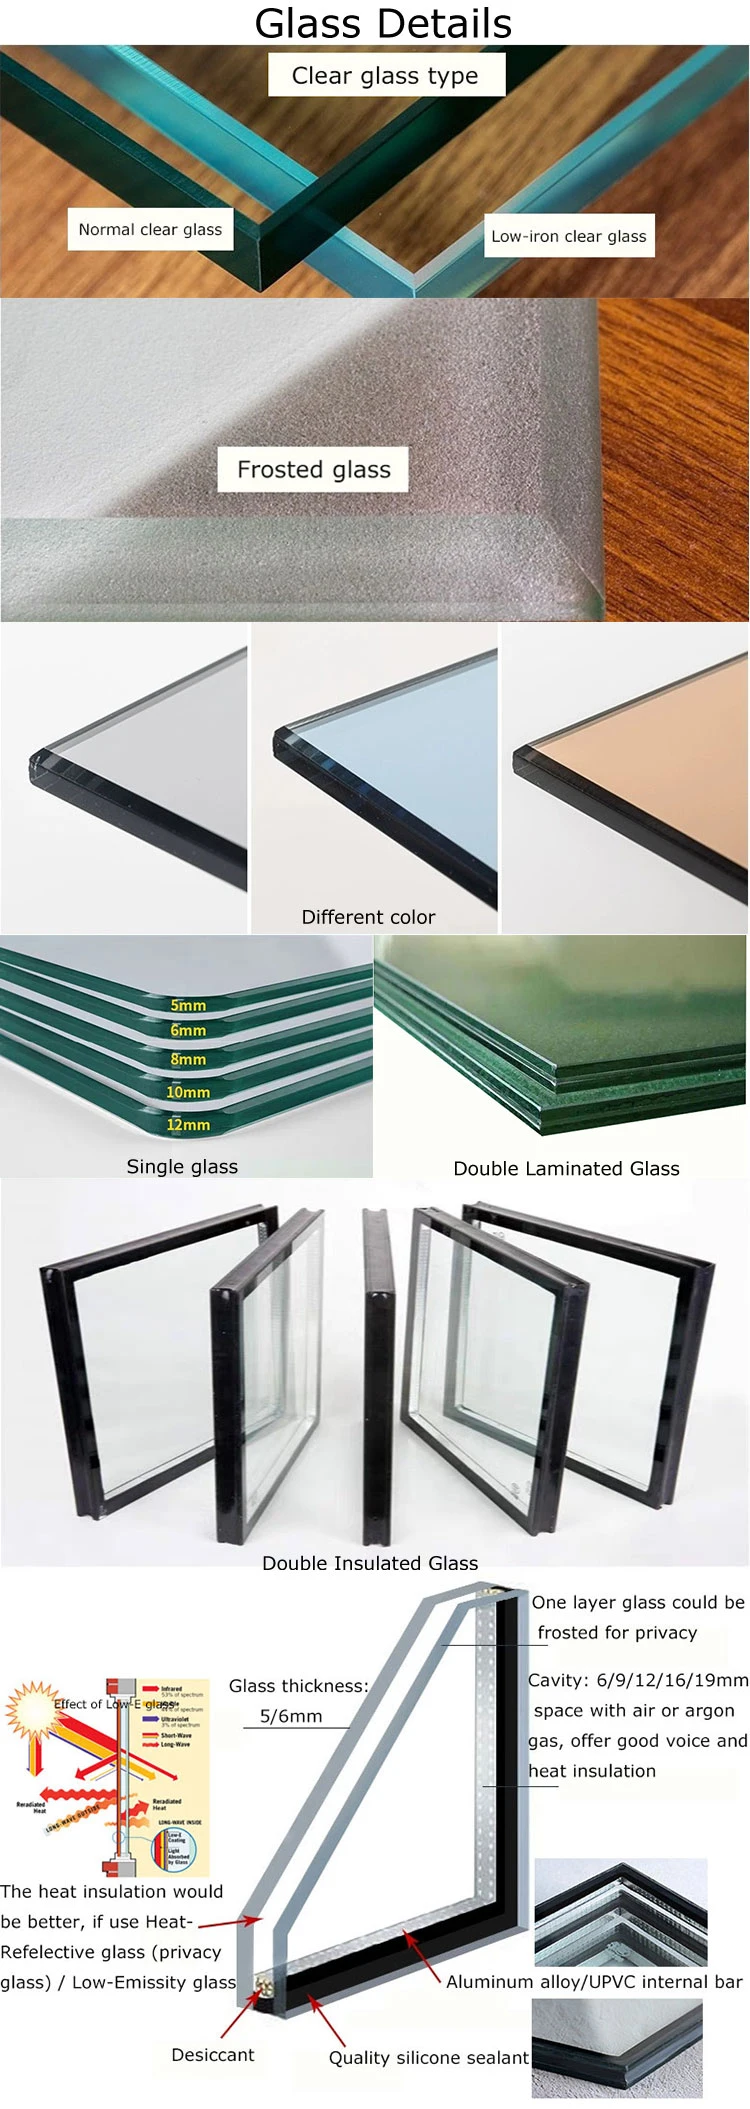 PVC/UPVC Co-Extruded White Profiles with Brown Films Casement/Fixed Window with Reflected Glass